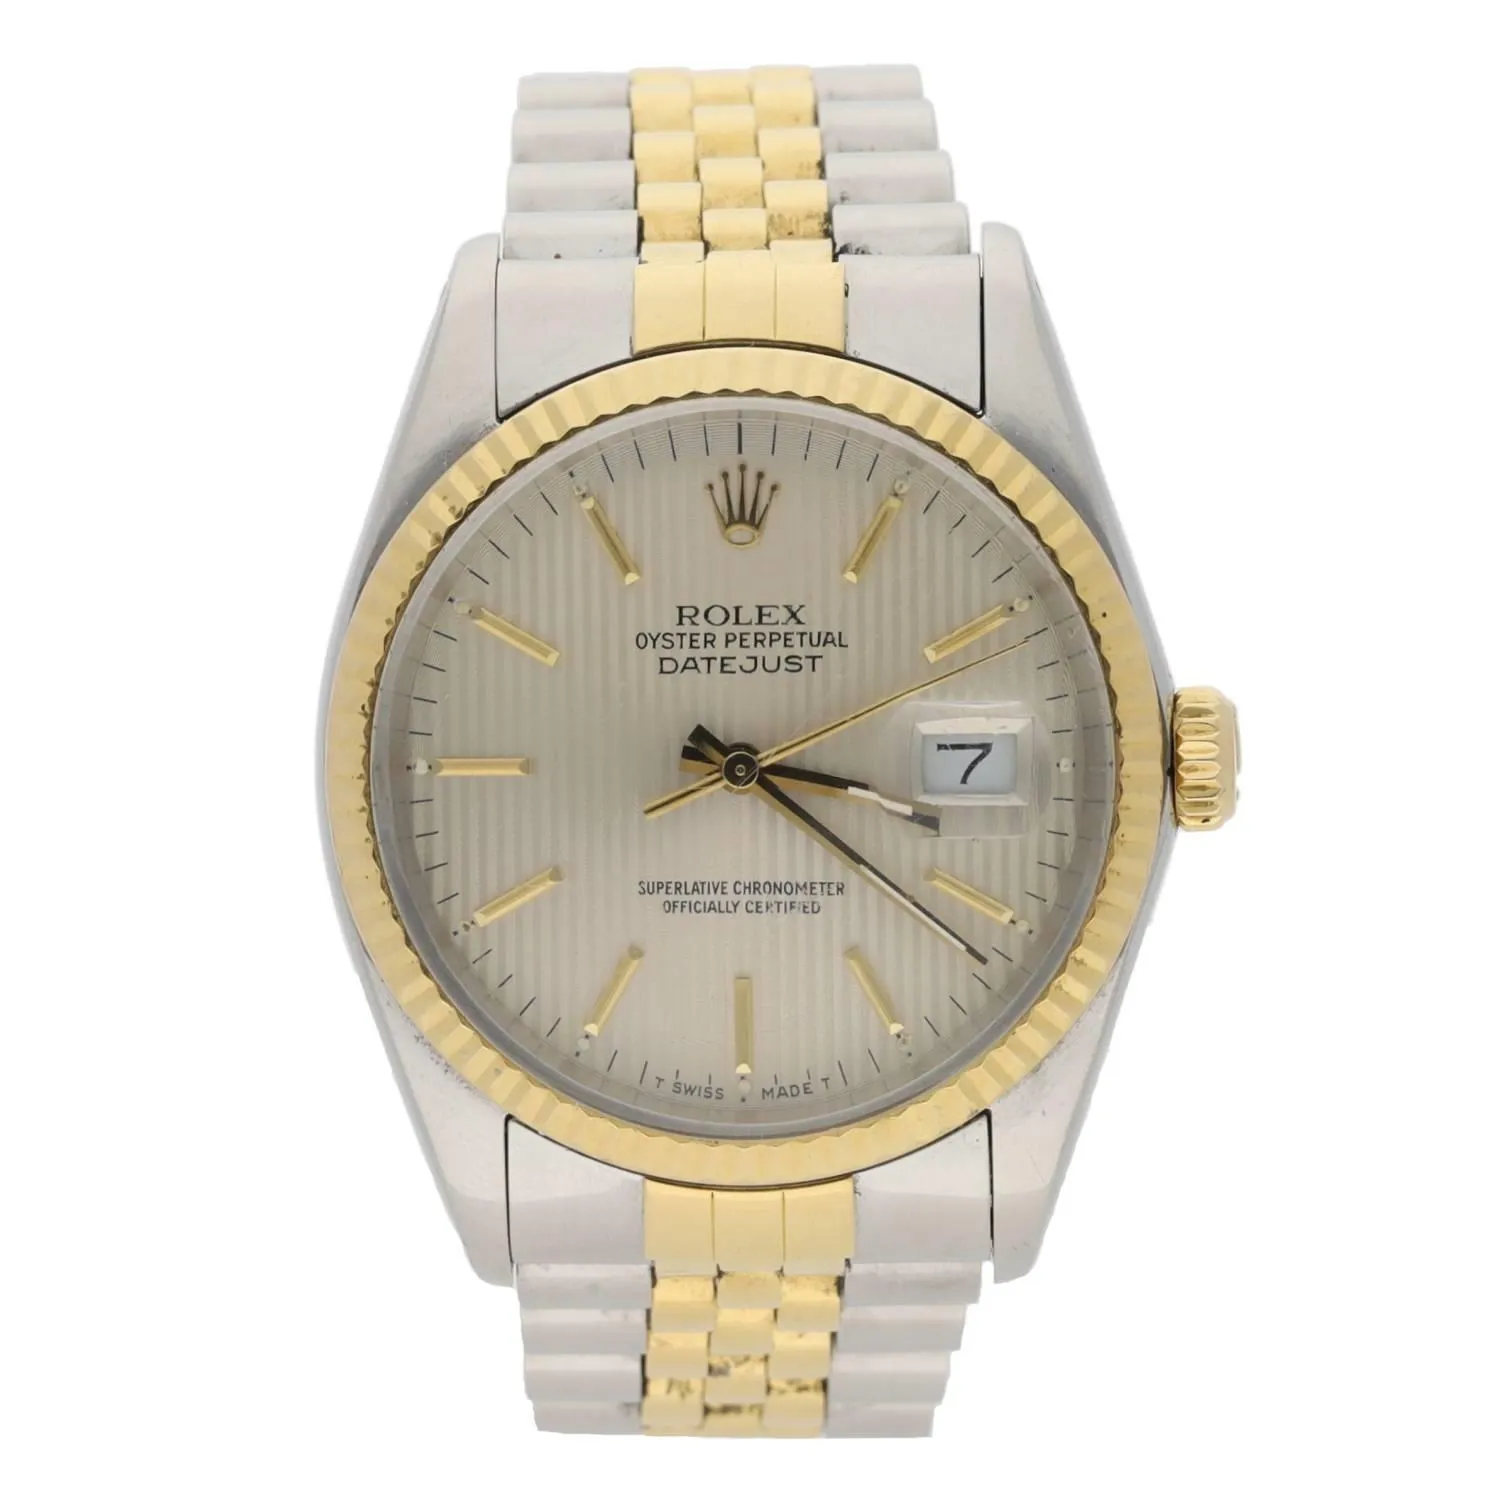 Rolex Oyster Perpetual "Datejust" 16013 nullmm